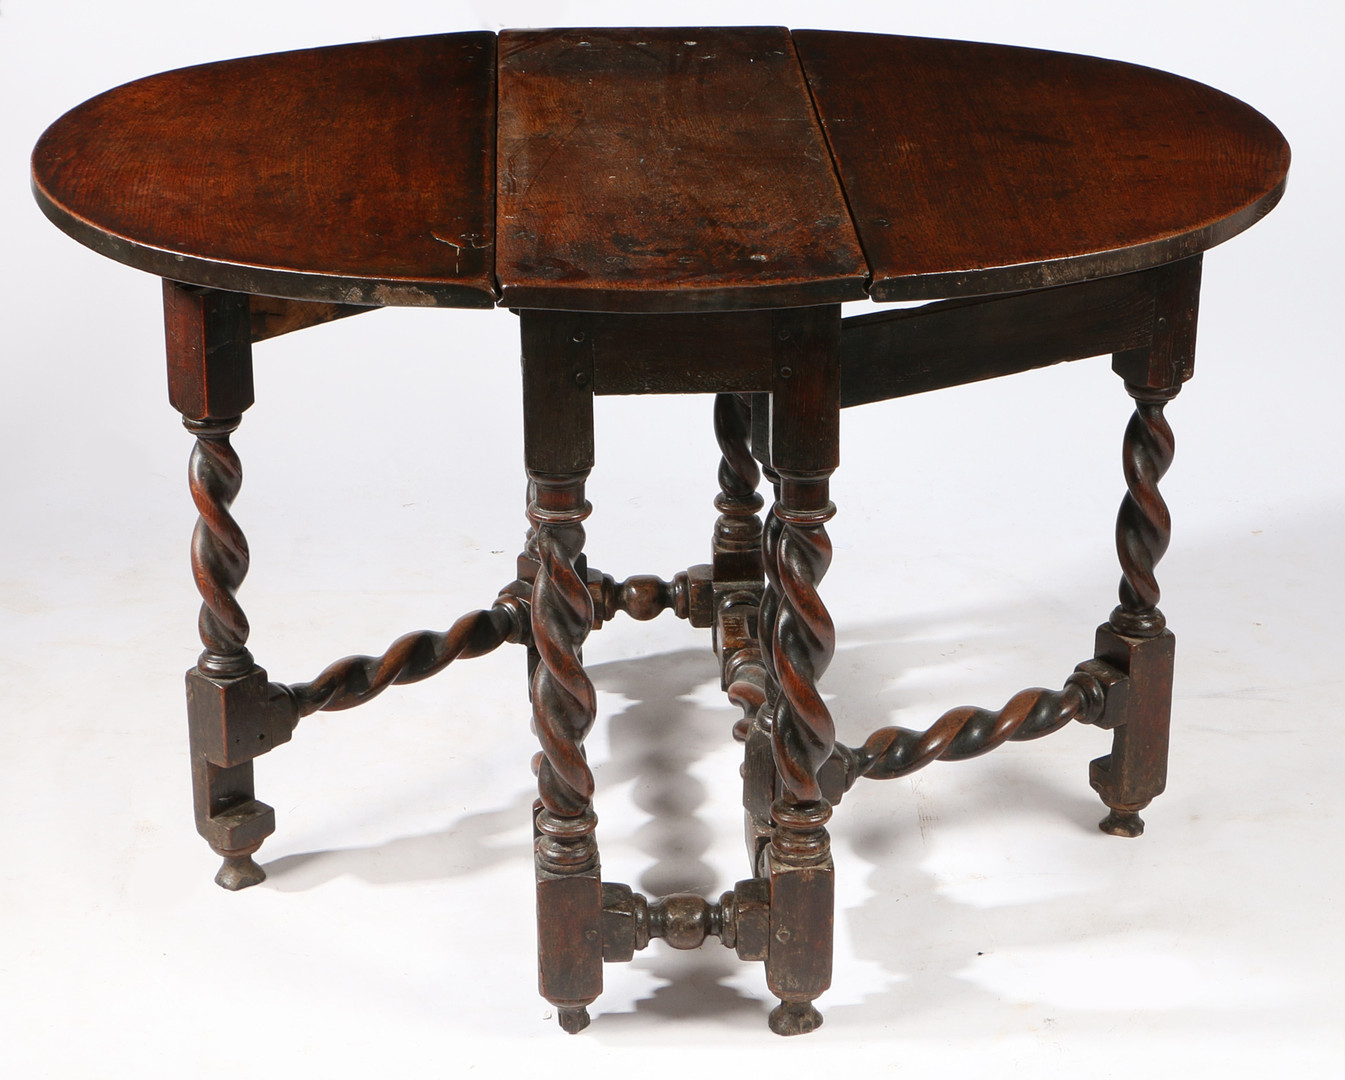 A CHARLES II OAK GATELEG TABLE, WITH SPIRAL-TURNED LEGS, CIRCA 1680. - Image 2 of 2